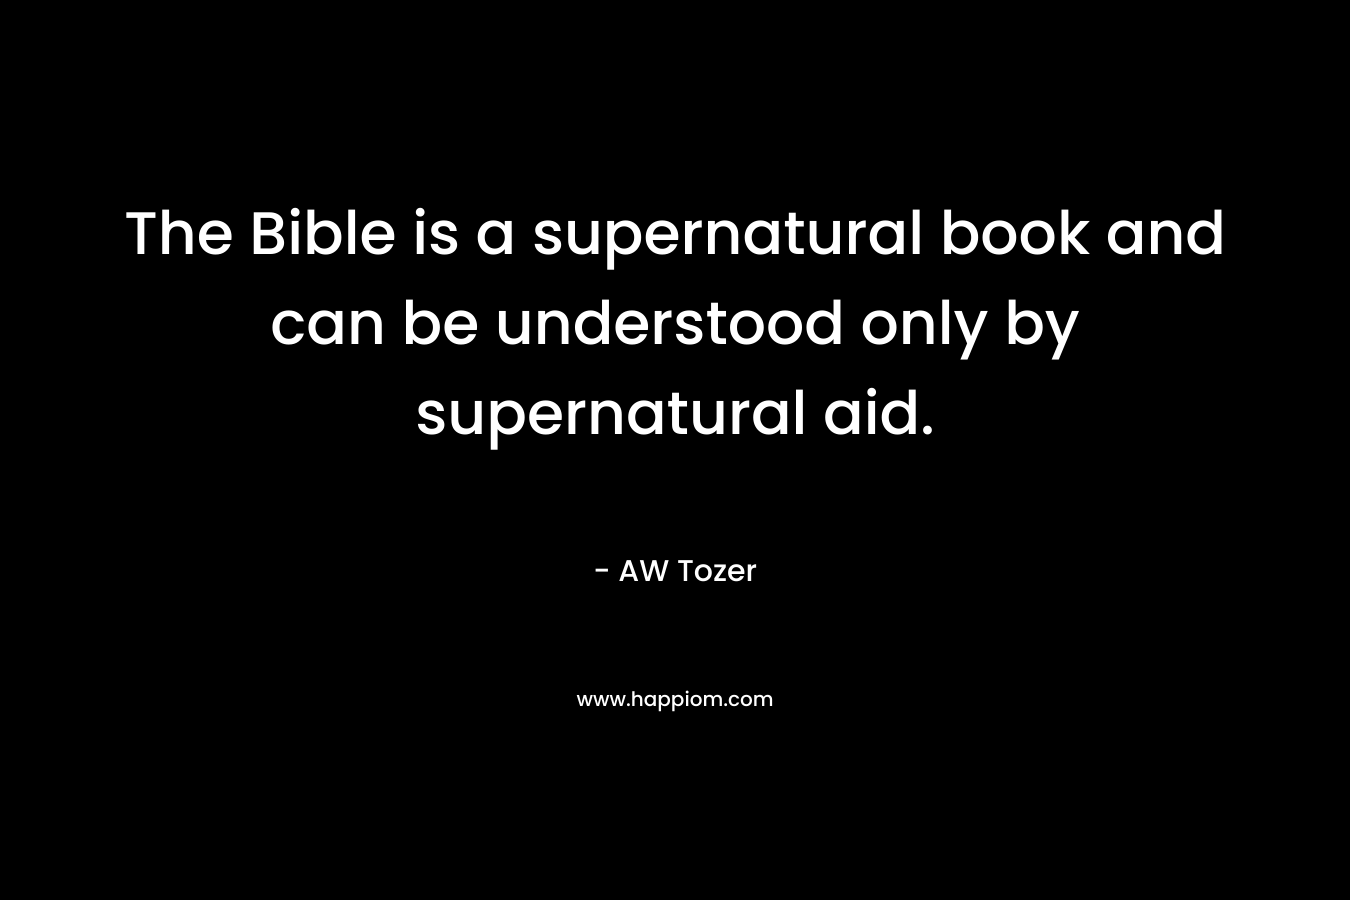 The Bible is a supernatural book and can be understood only by supernatural aid.